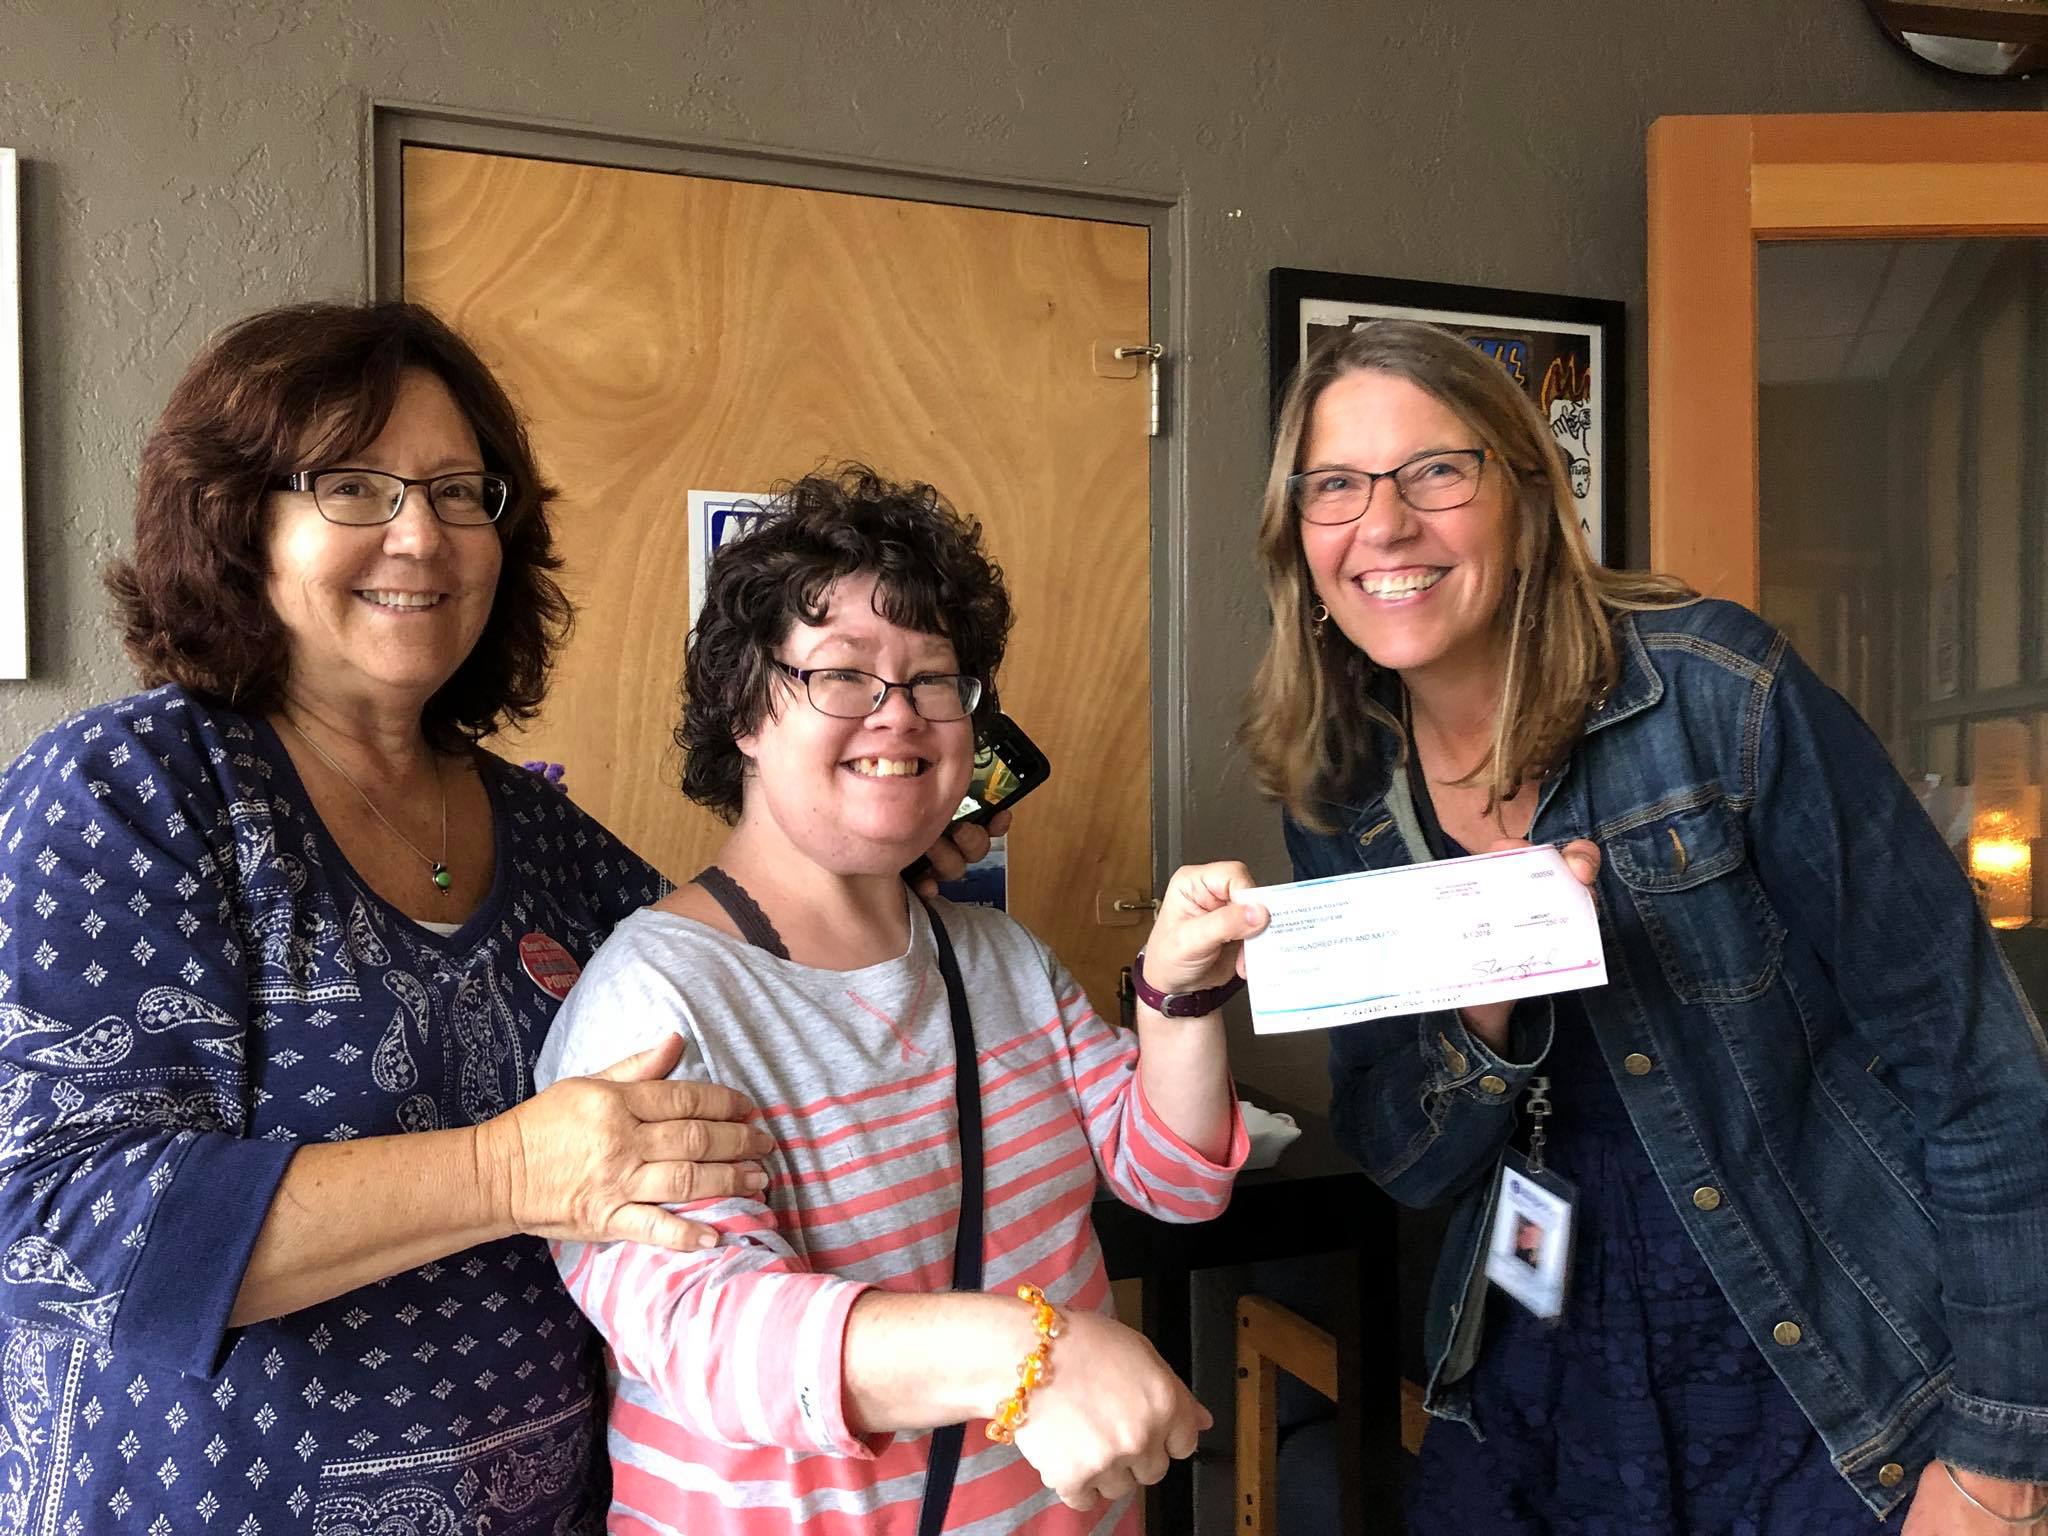 3 women smiling at a camera, one holding check